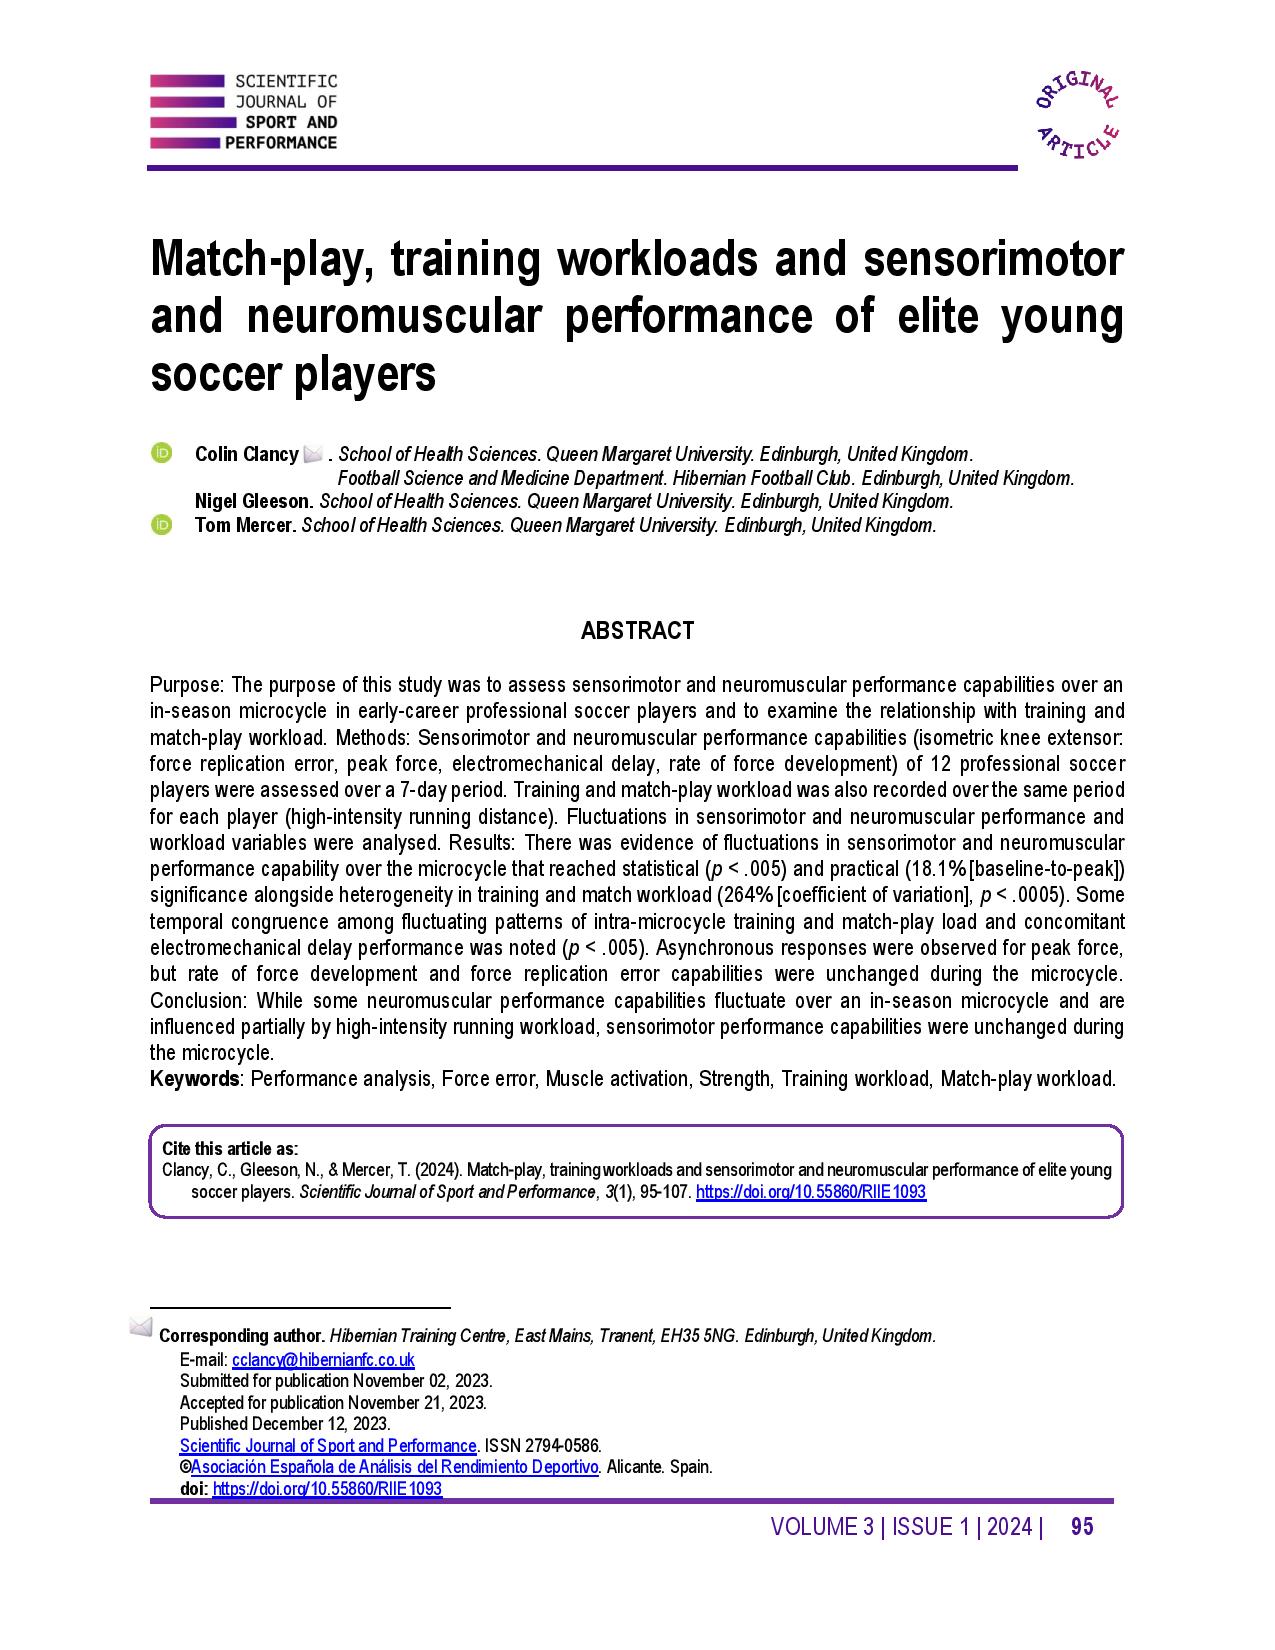 Match-play, training workloads and sensorimotor and neuromuscular performance of elite young soccer players